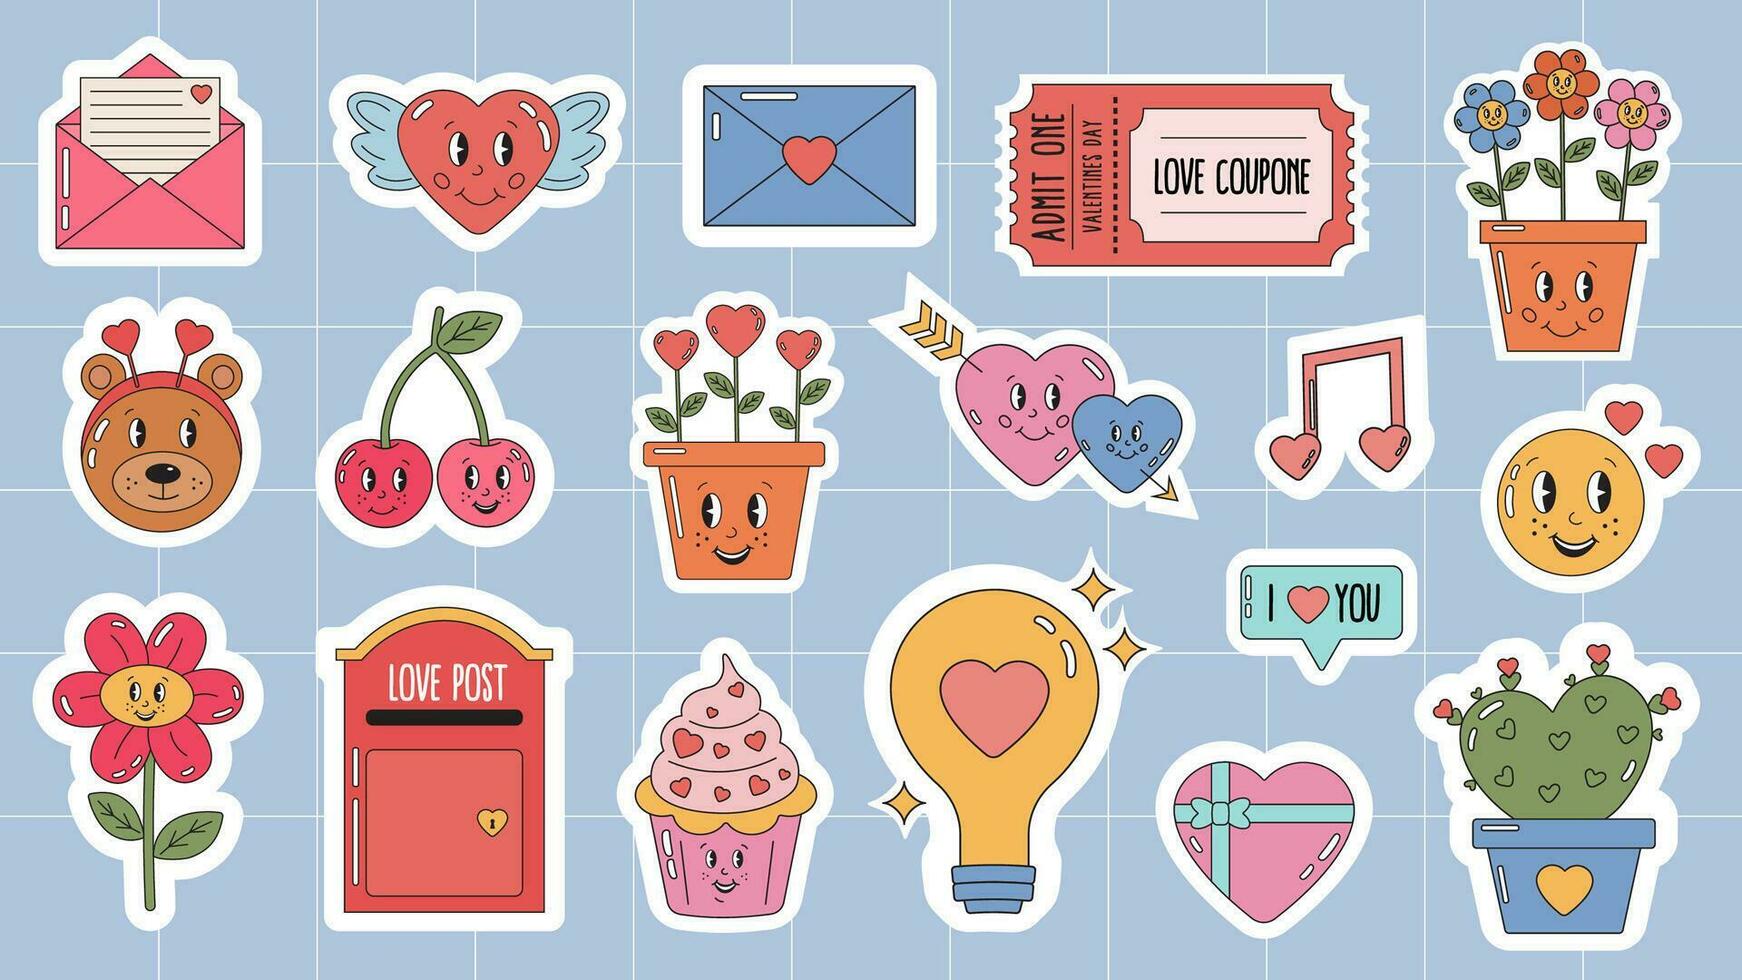 Retro cartoon happy love Valentines day stickers pack for scrapbooking, daily planner, diary. Valentine day pack. Romantic doodle vector icons for daily planner, diary. Groovy hippie love stickers.